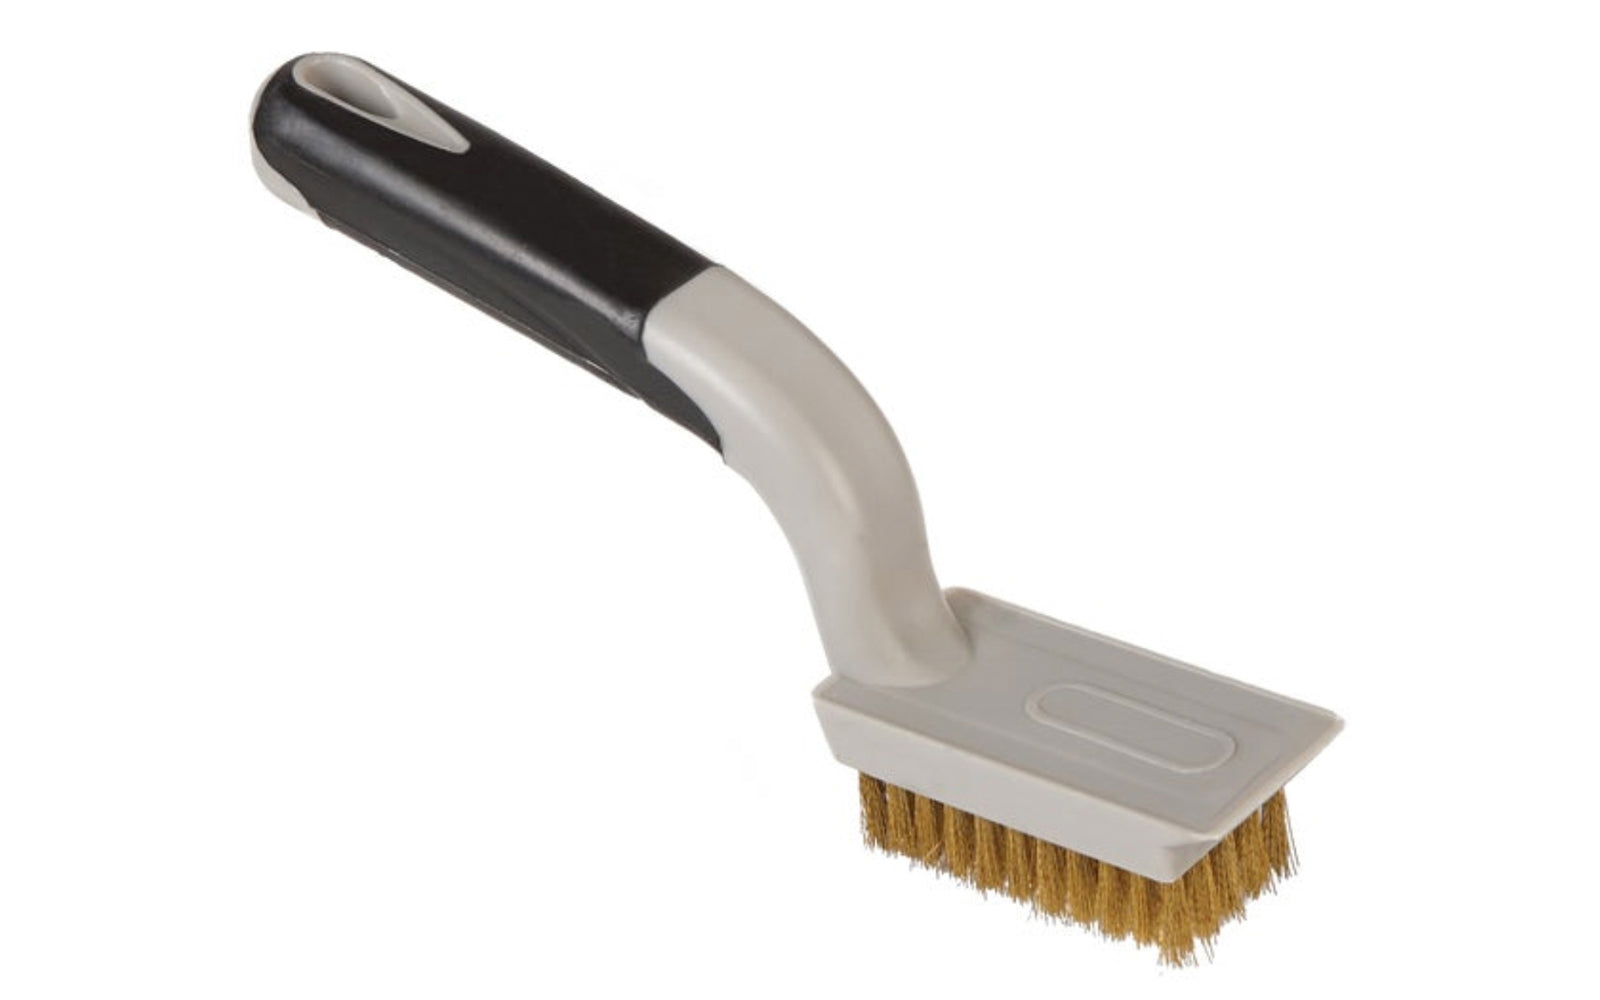 Brass Wire Brush With Soft Grip can be used to remove rust, scale & flaking paint as well as for roughing smooth surfaces before applying adhesives. 2-1/4